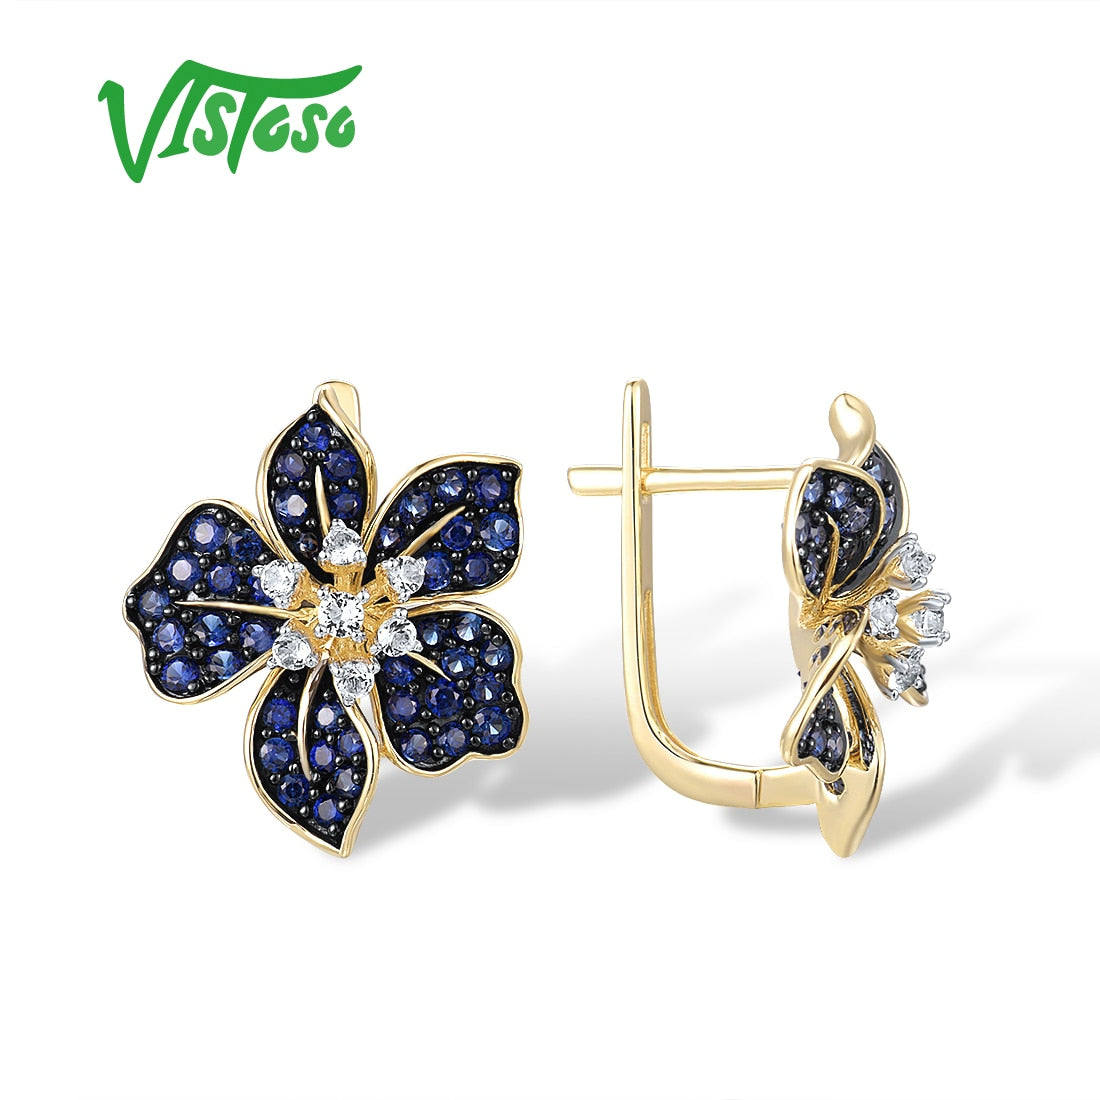 Gold Earrings For Women - Created Sapphire White Topaz Blue Lily Flower Fine Jewelry